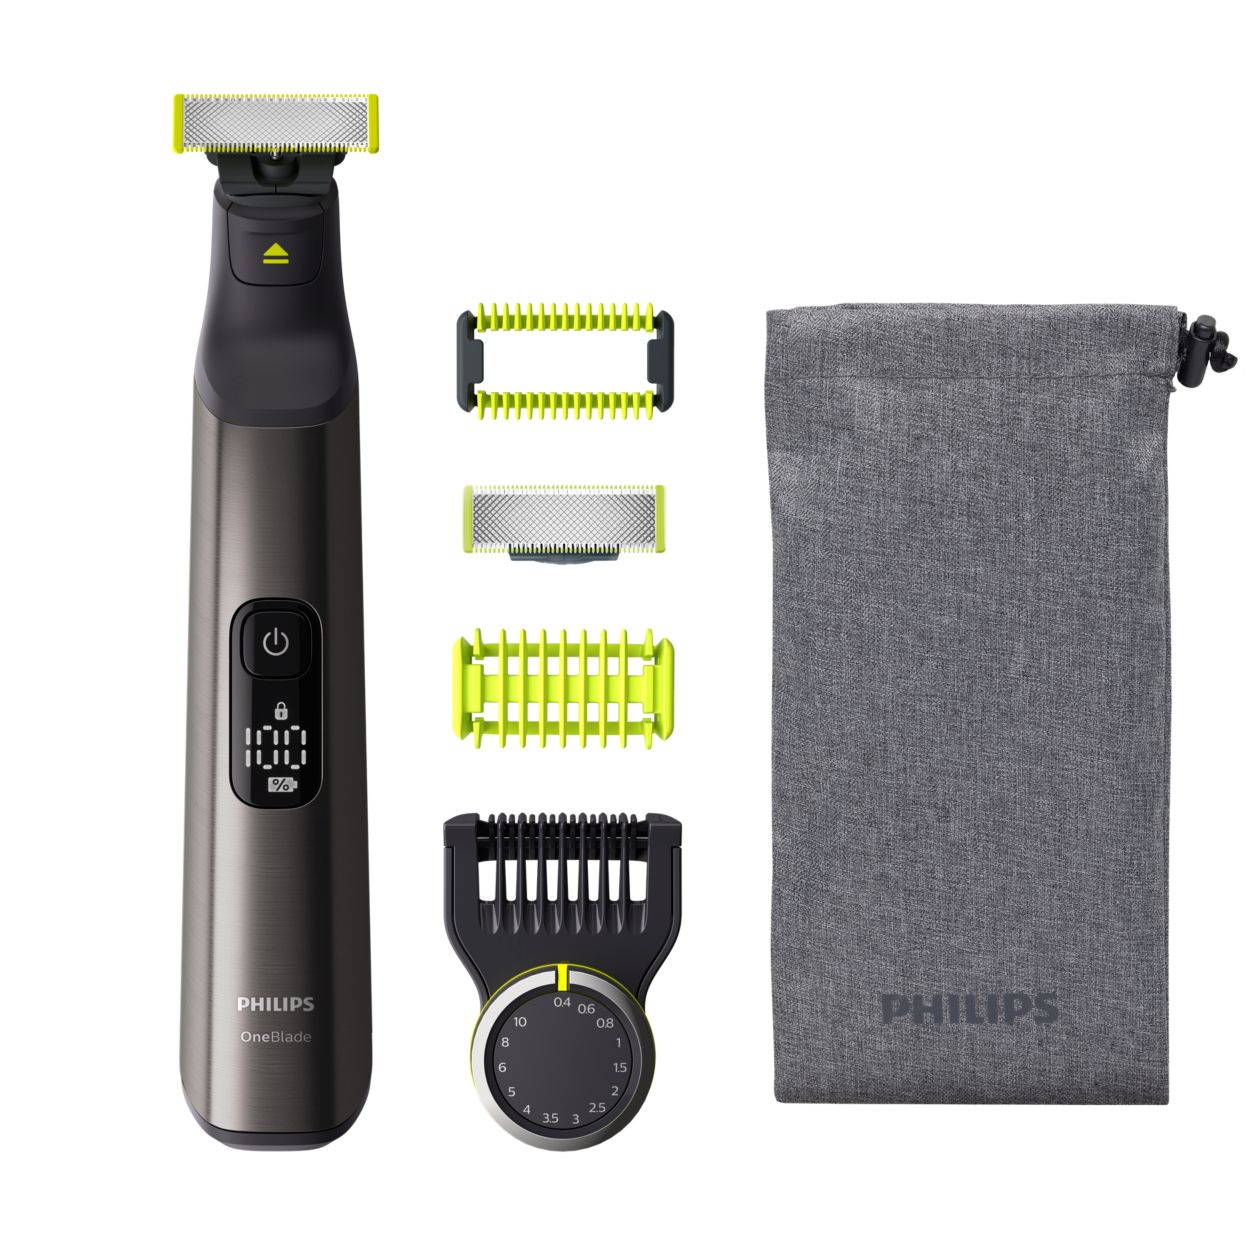 Pro + | QP6550/30 Body Face Philips OneBlade